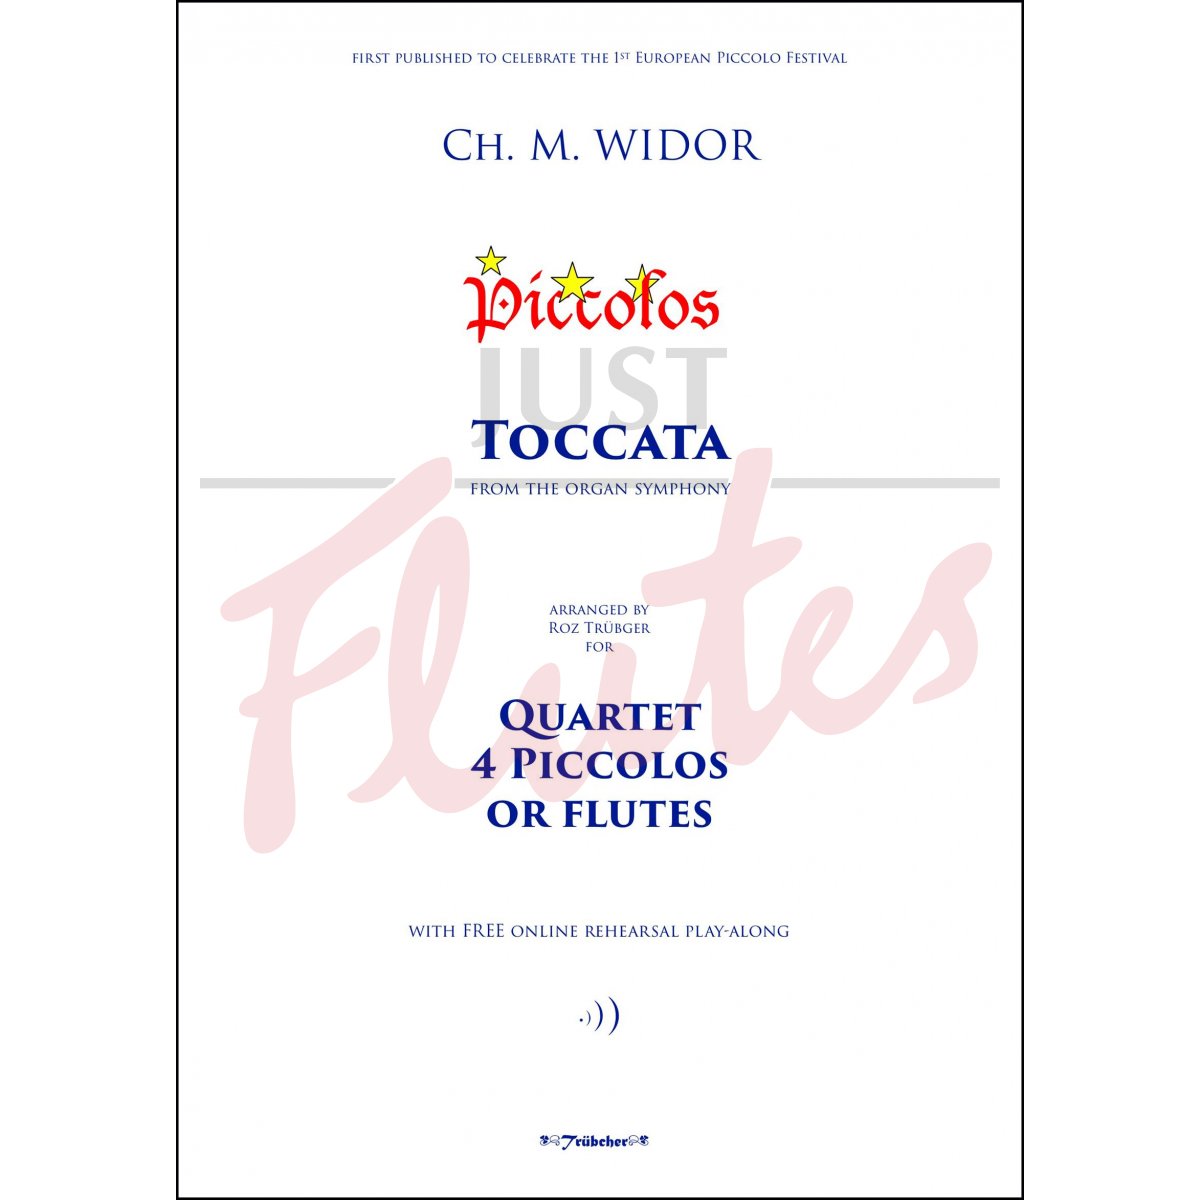 Toccata from the Organ Symphony for Four Piccolos or Flutes